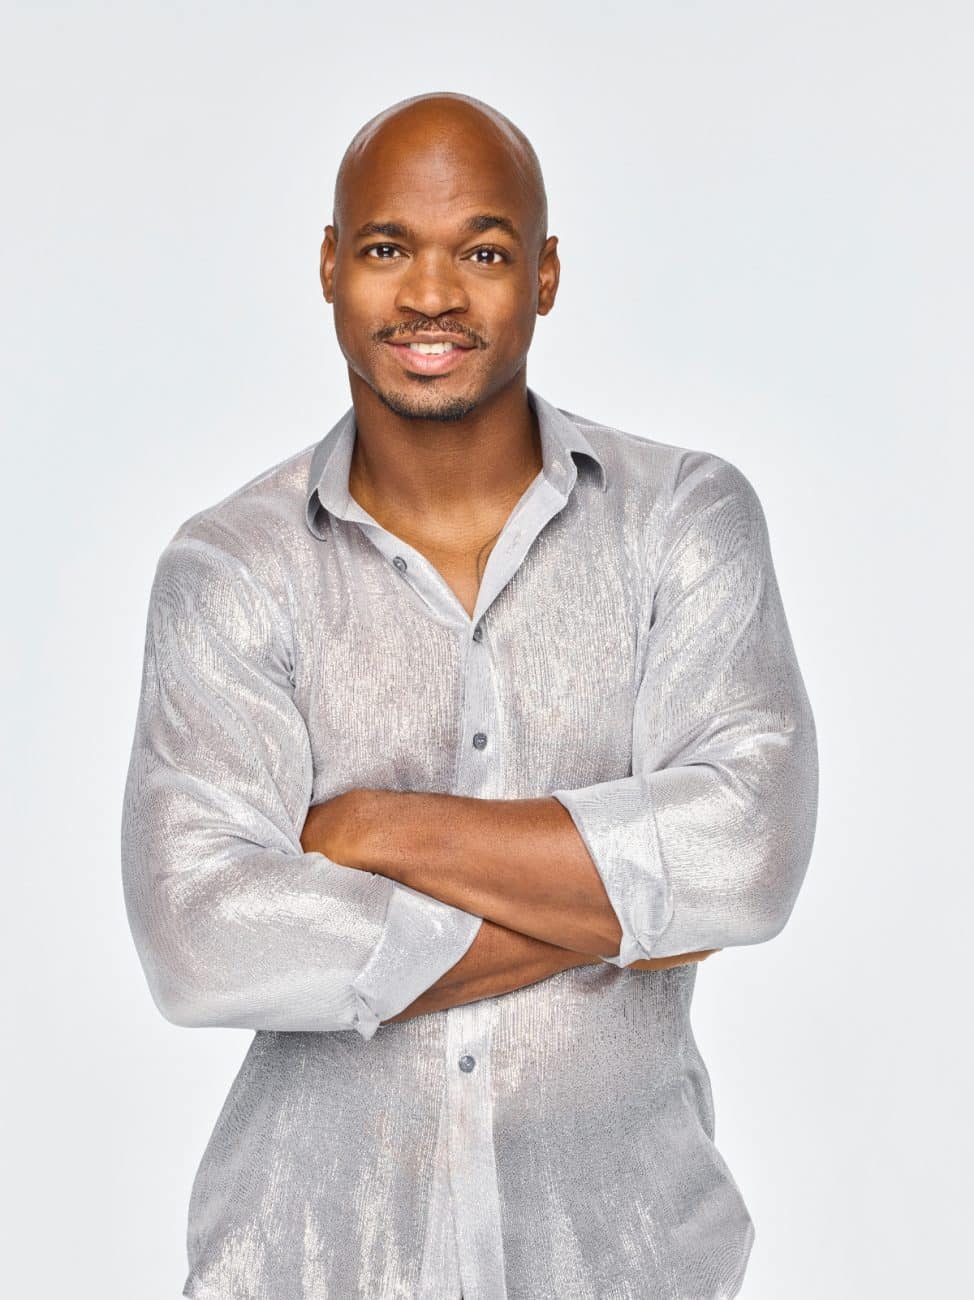 Adrian Peterson on Dancing with the Stars